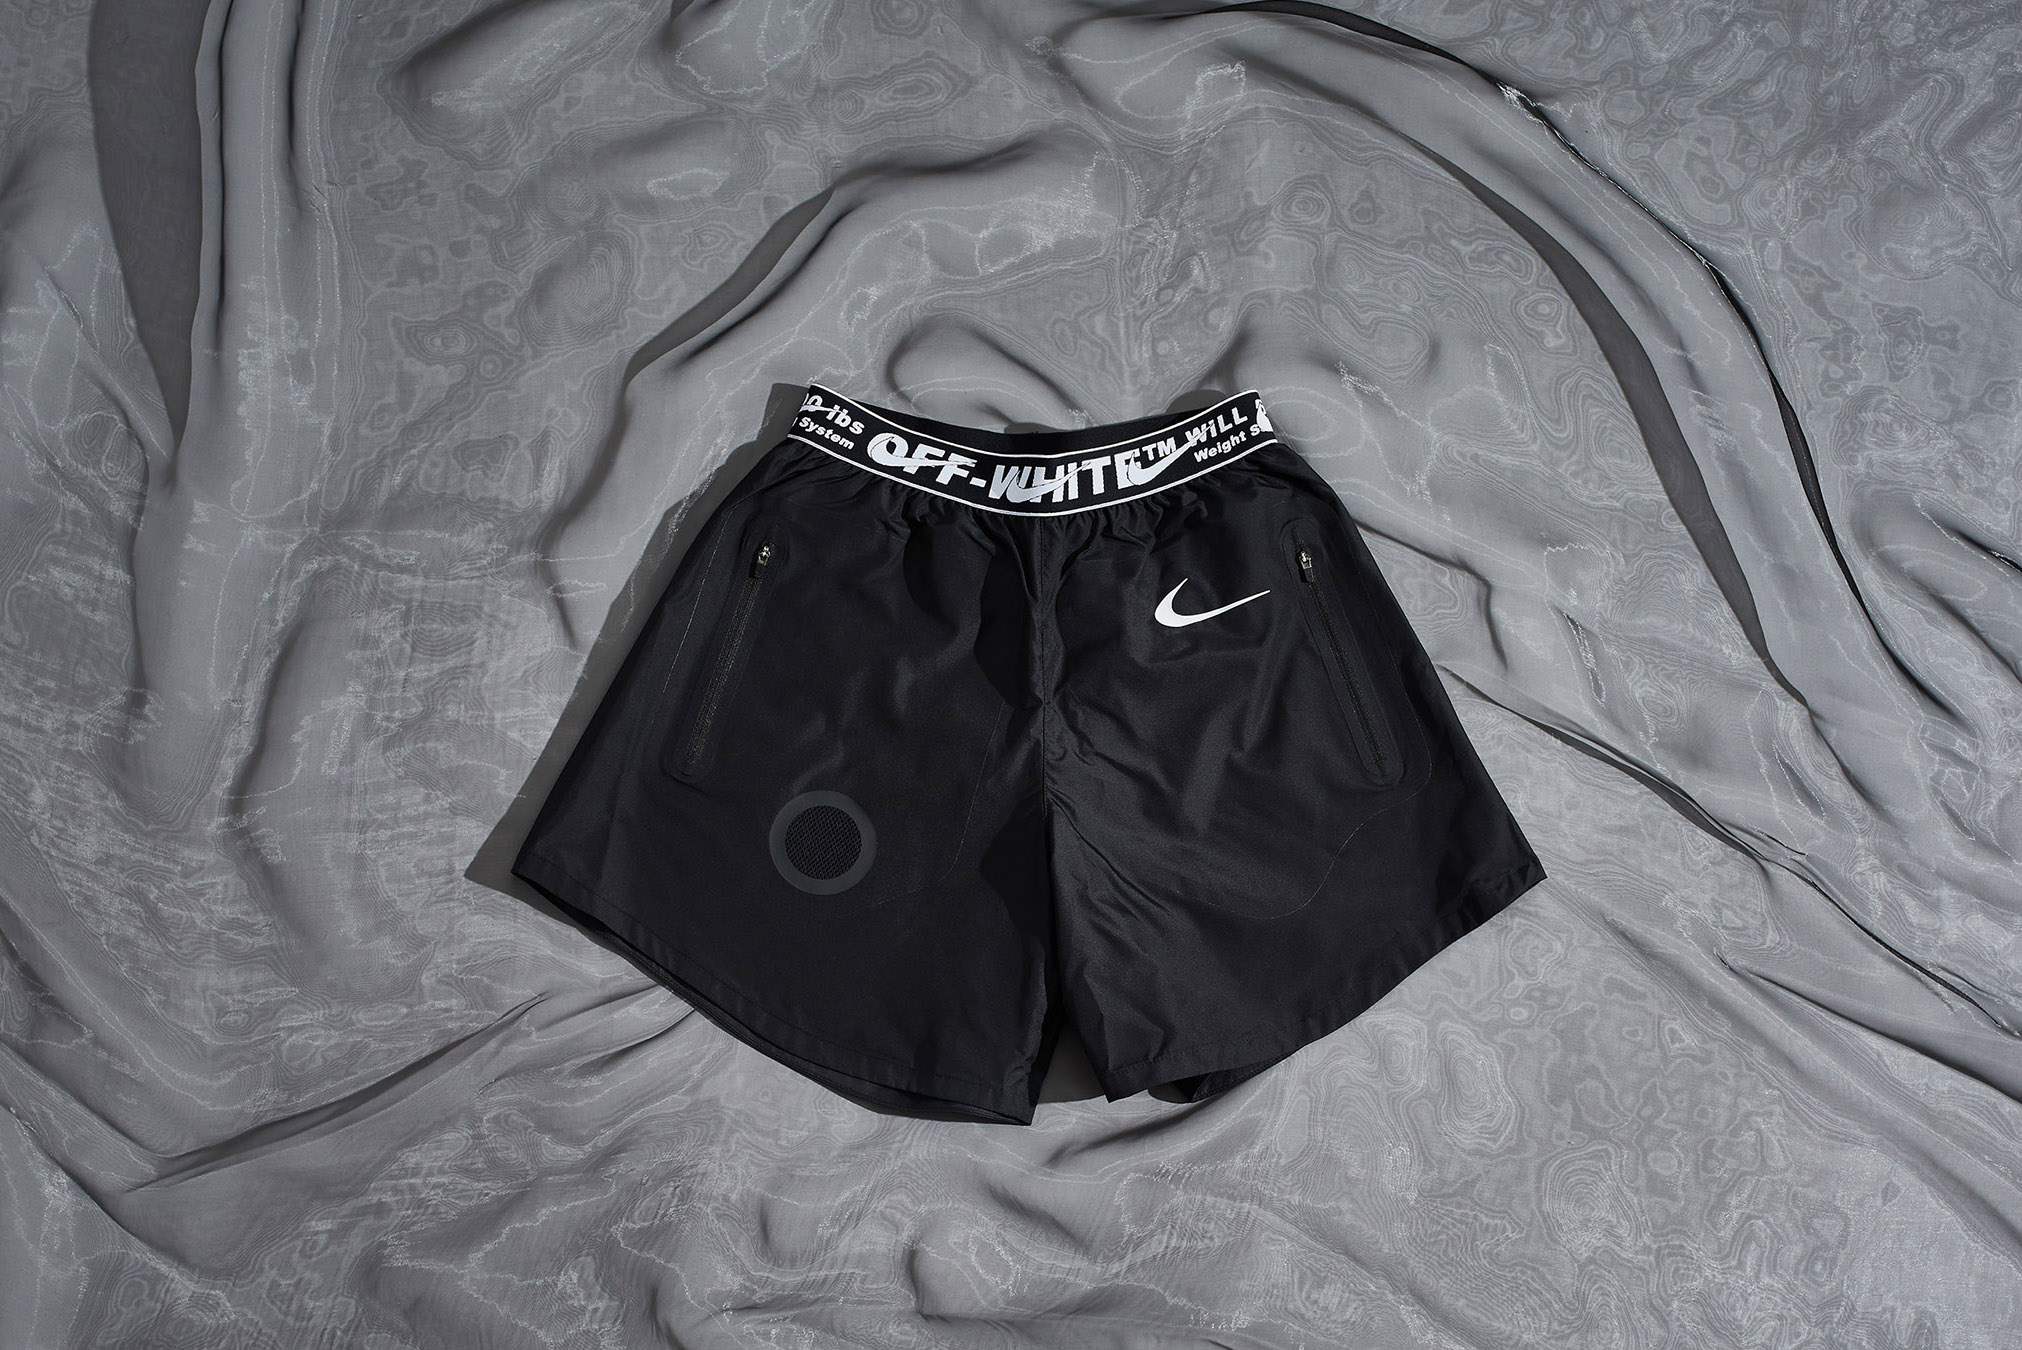 nike off white workout clothes